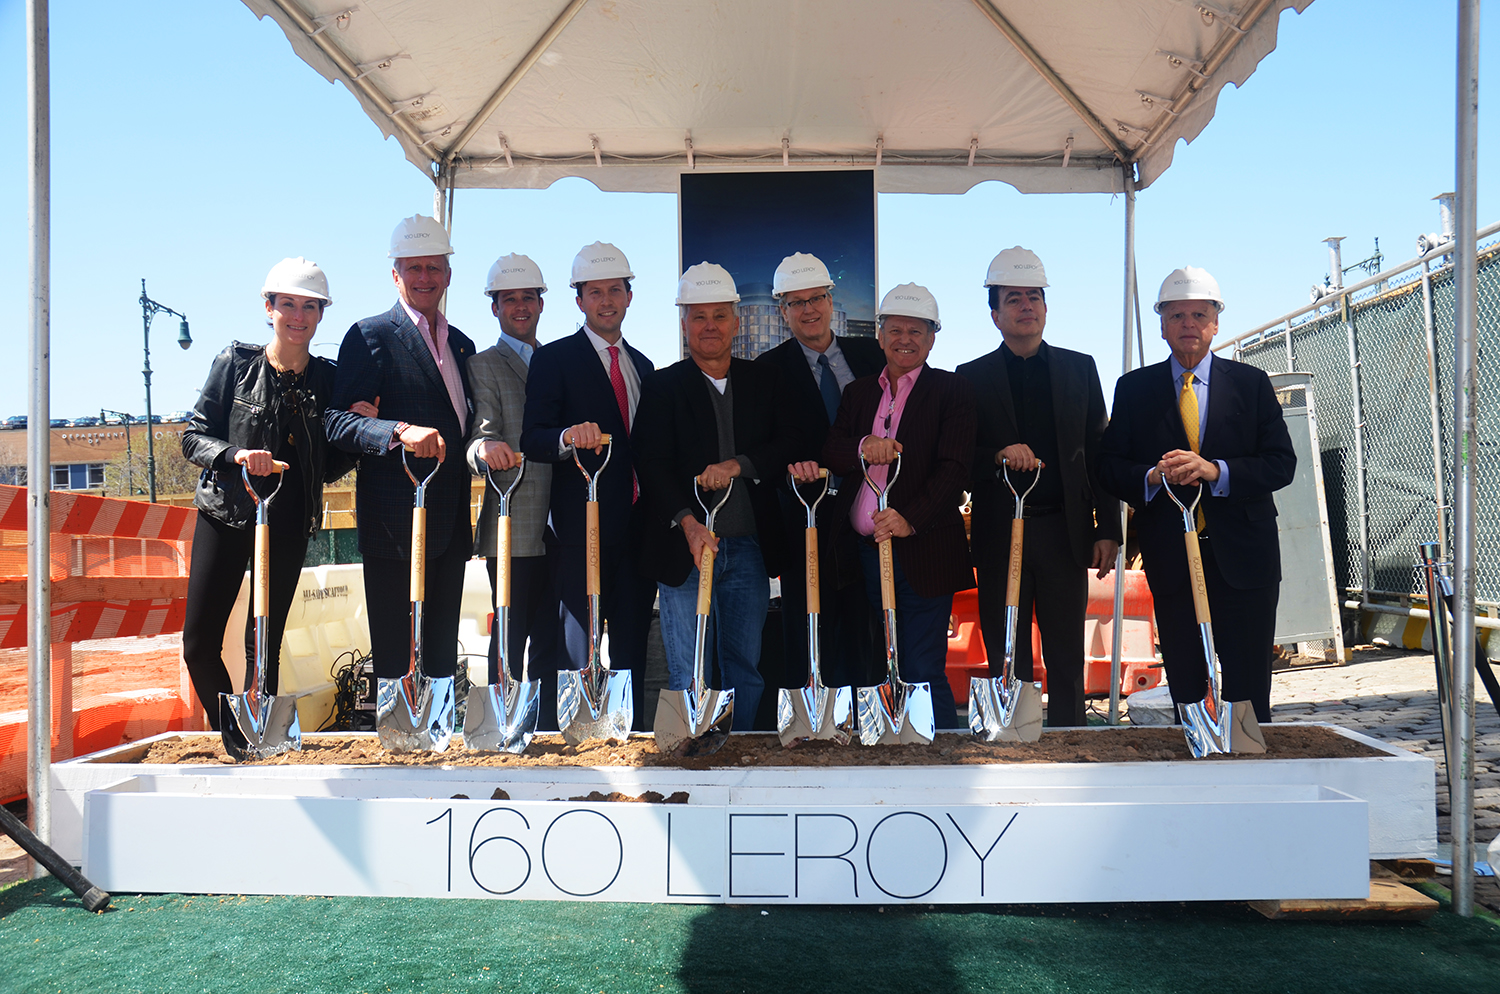 Groundbreaking for 160 Leroy Street. All photos by the author